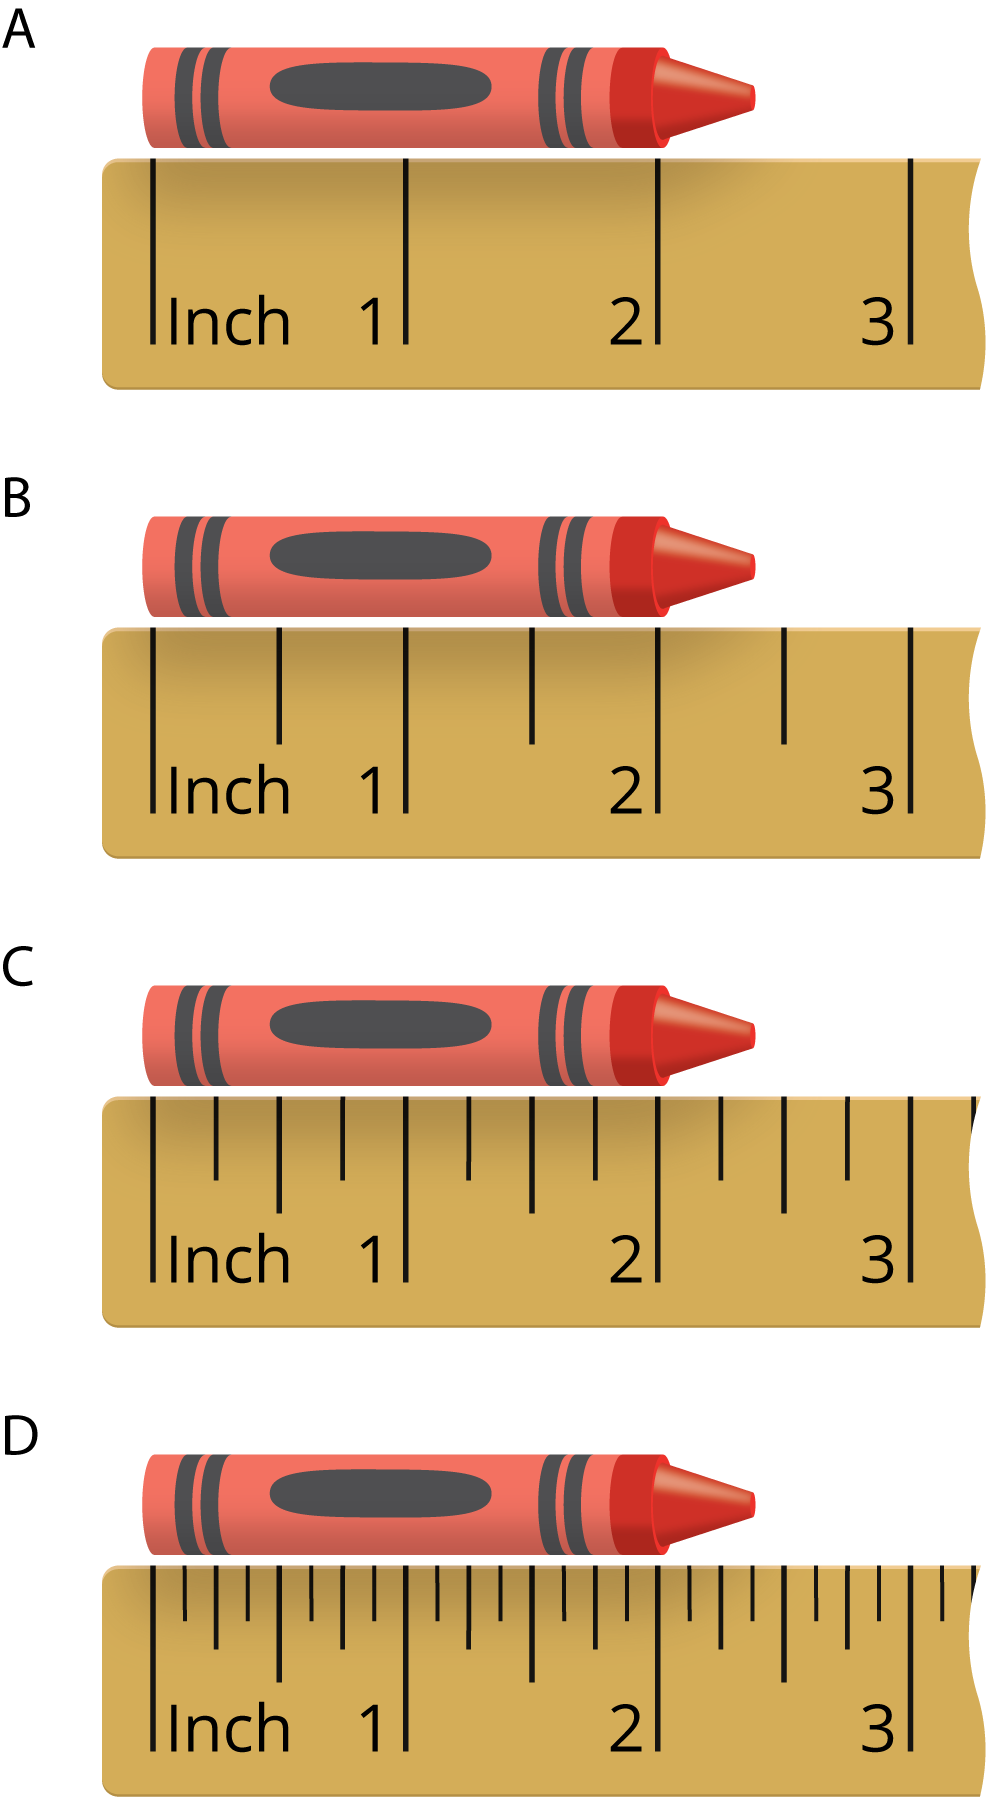 images of 4 rulers measuring same crayon. Ruler A, scaled by whole inches. Ruler B, scaled by half inches. Ruler C, scaled by fourths of an inch. Ruler D, scaled by eighths of an inch. Crayon almost 2 and 1 half inches.